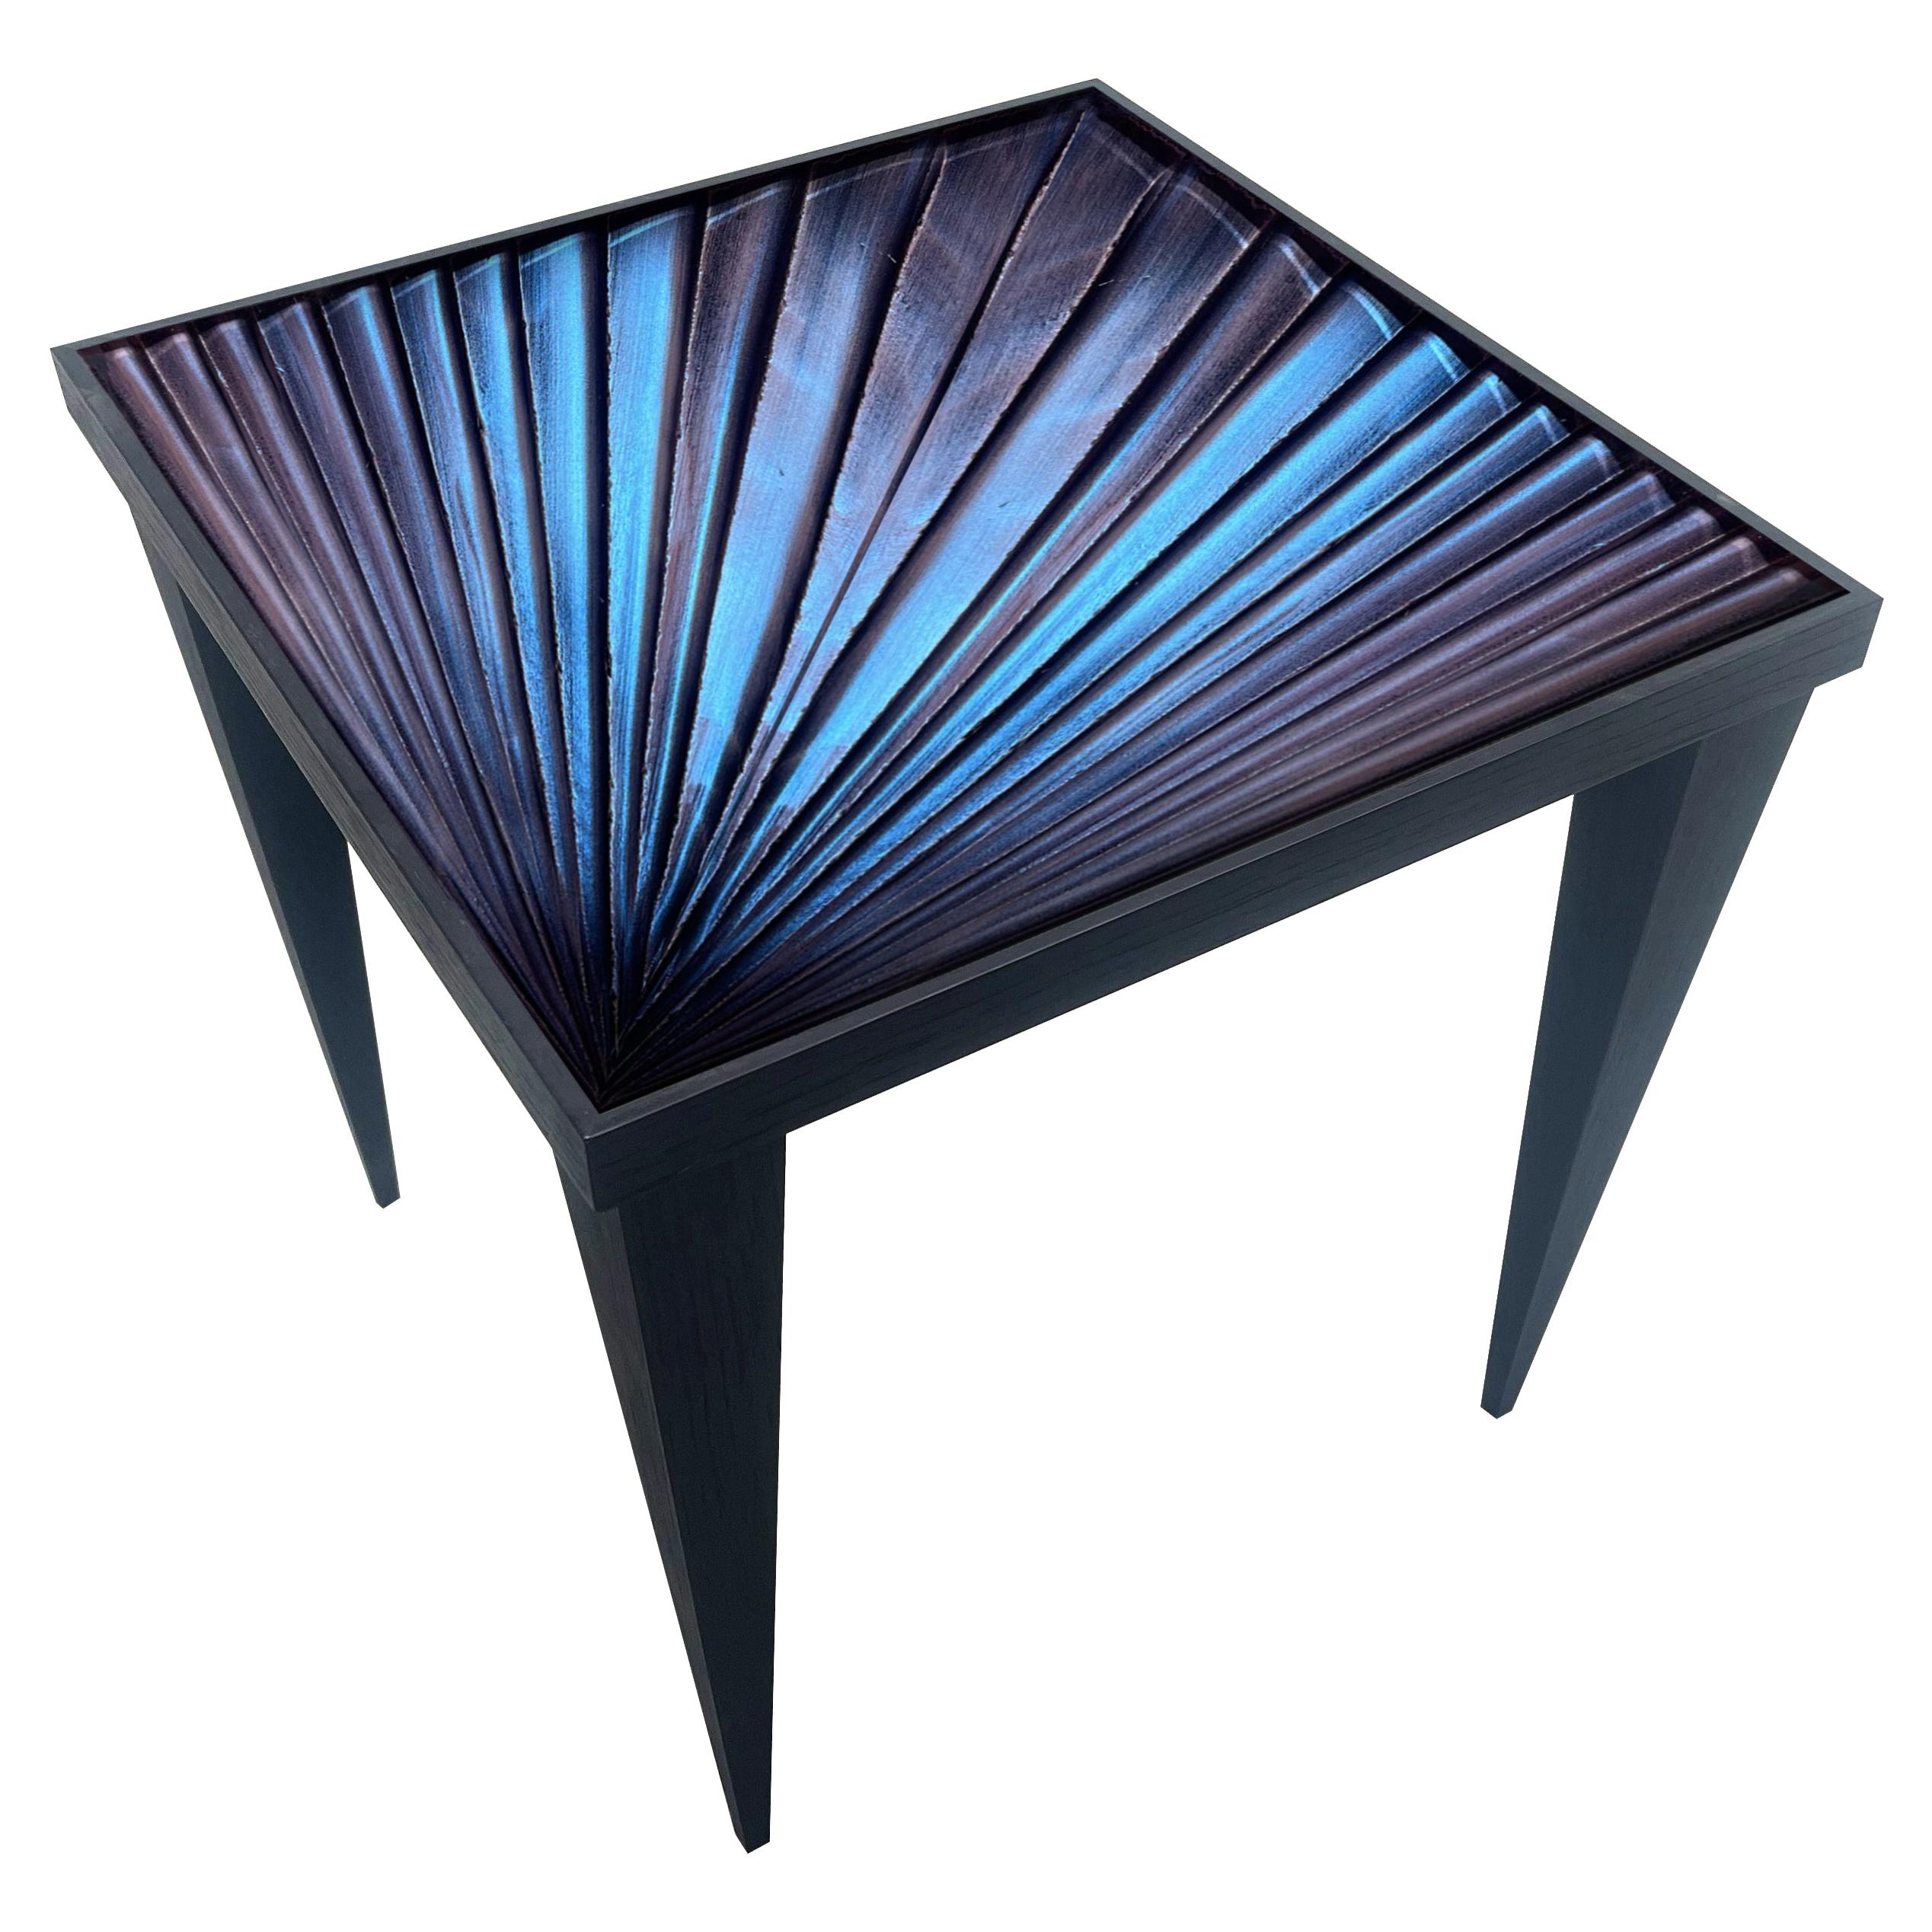 Contemporary ‘Square’ Table Blue Crystal and Oak Wood Handmade by Ghirò Studio